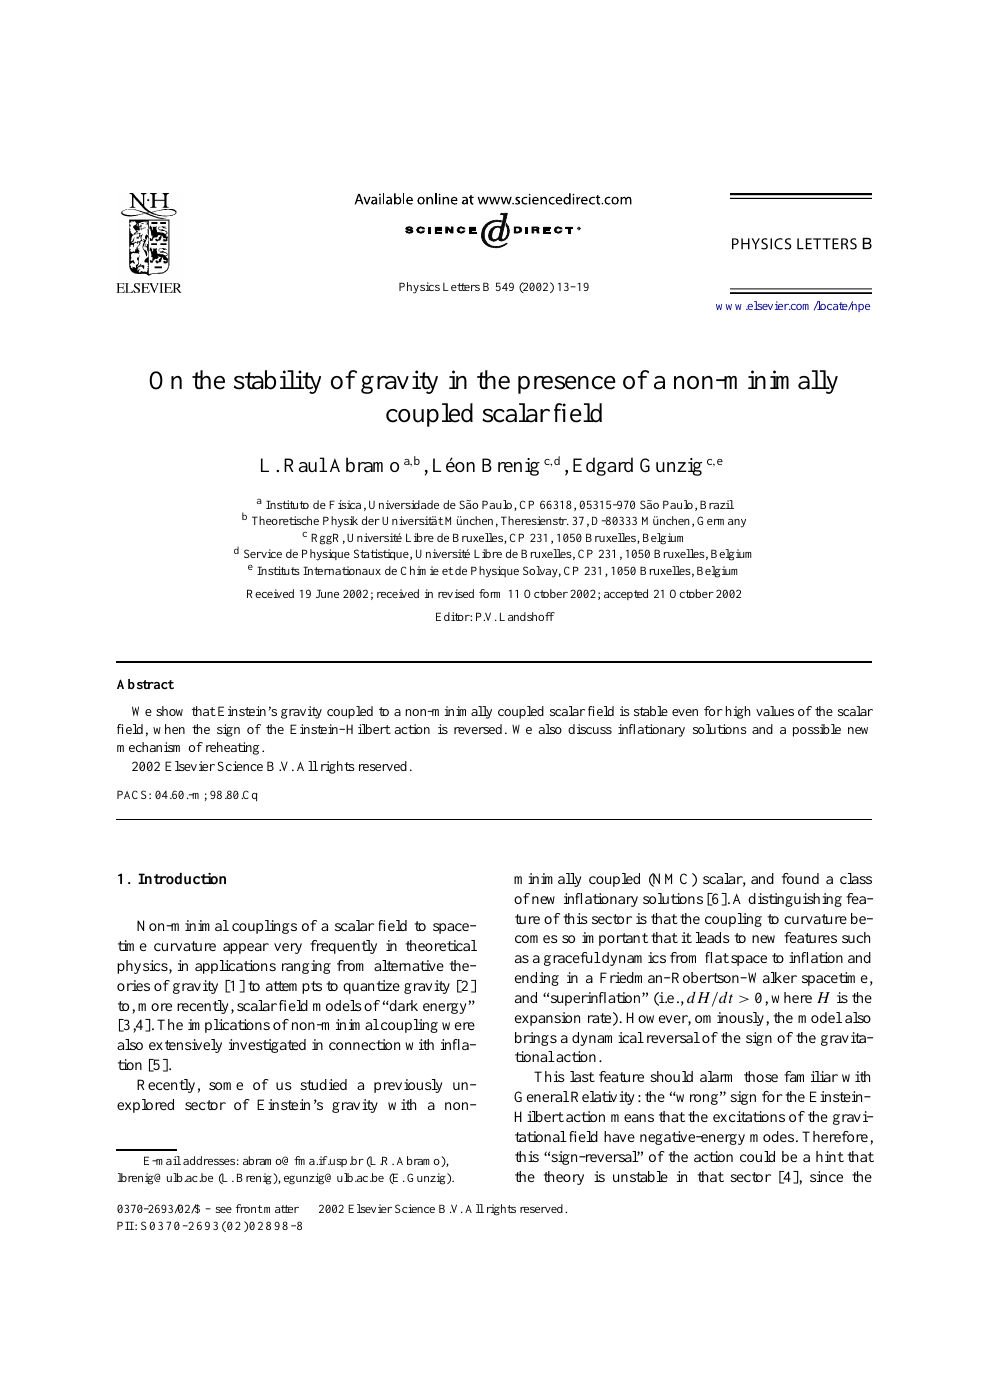 On The Stability Of Gravity In The Presence Of A Non Minimally Coupled Scalar Field Topic Of Research Paper In Physical Sciences Download Scholarly Article Pdf And Read For Free On Cyberleninka